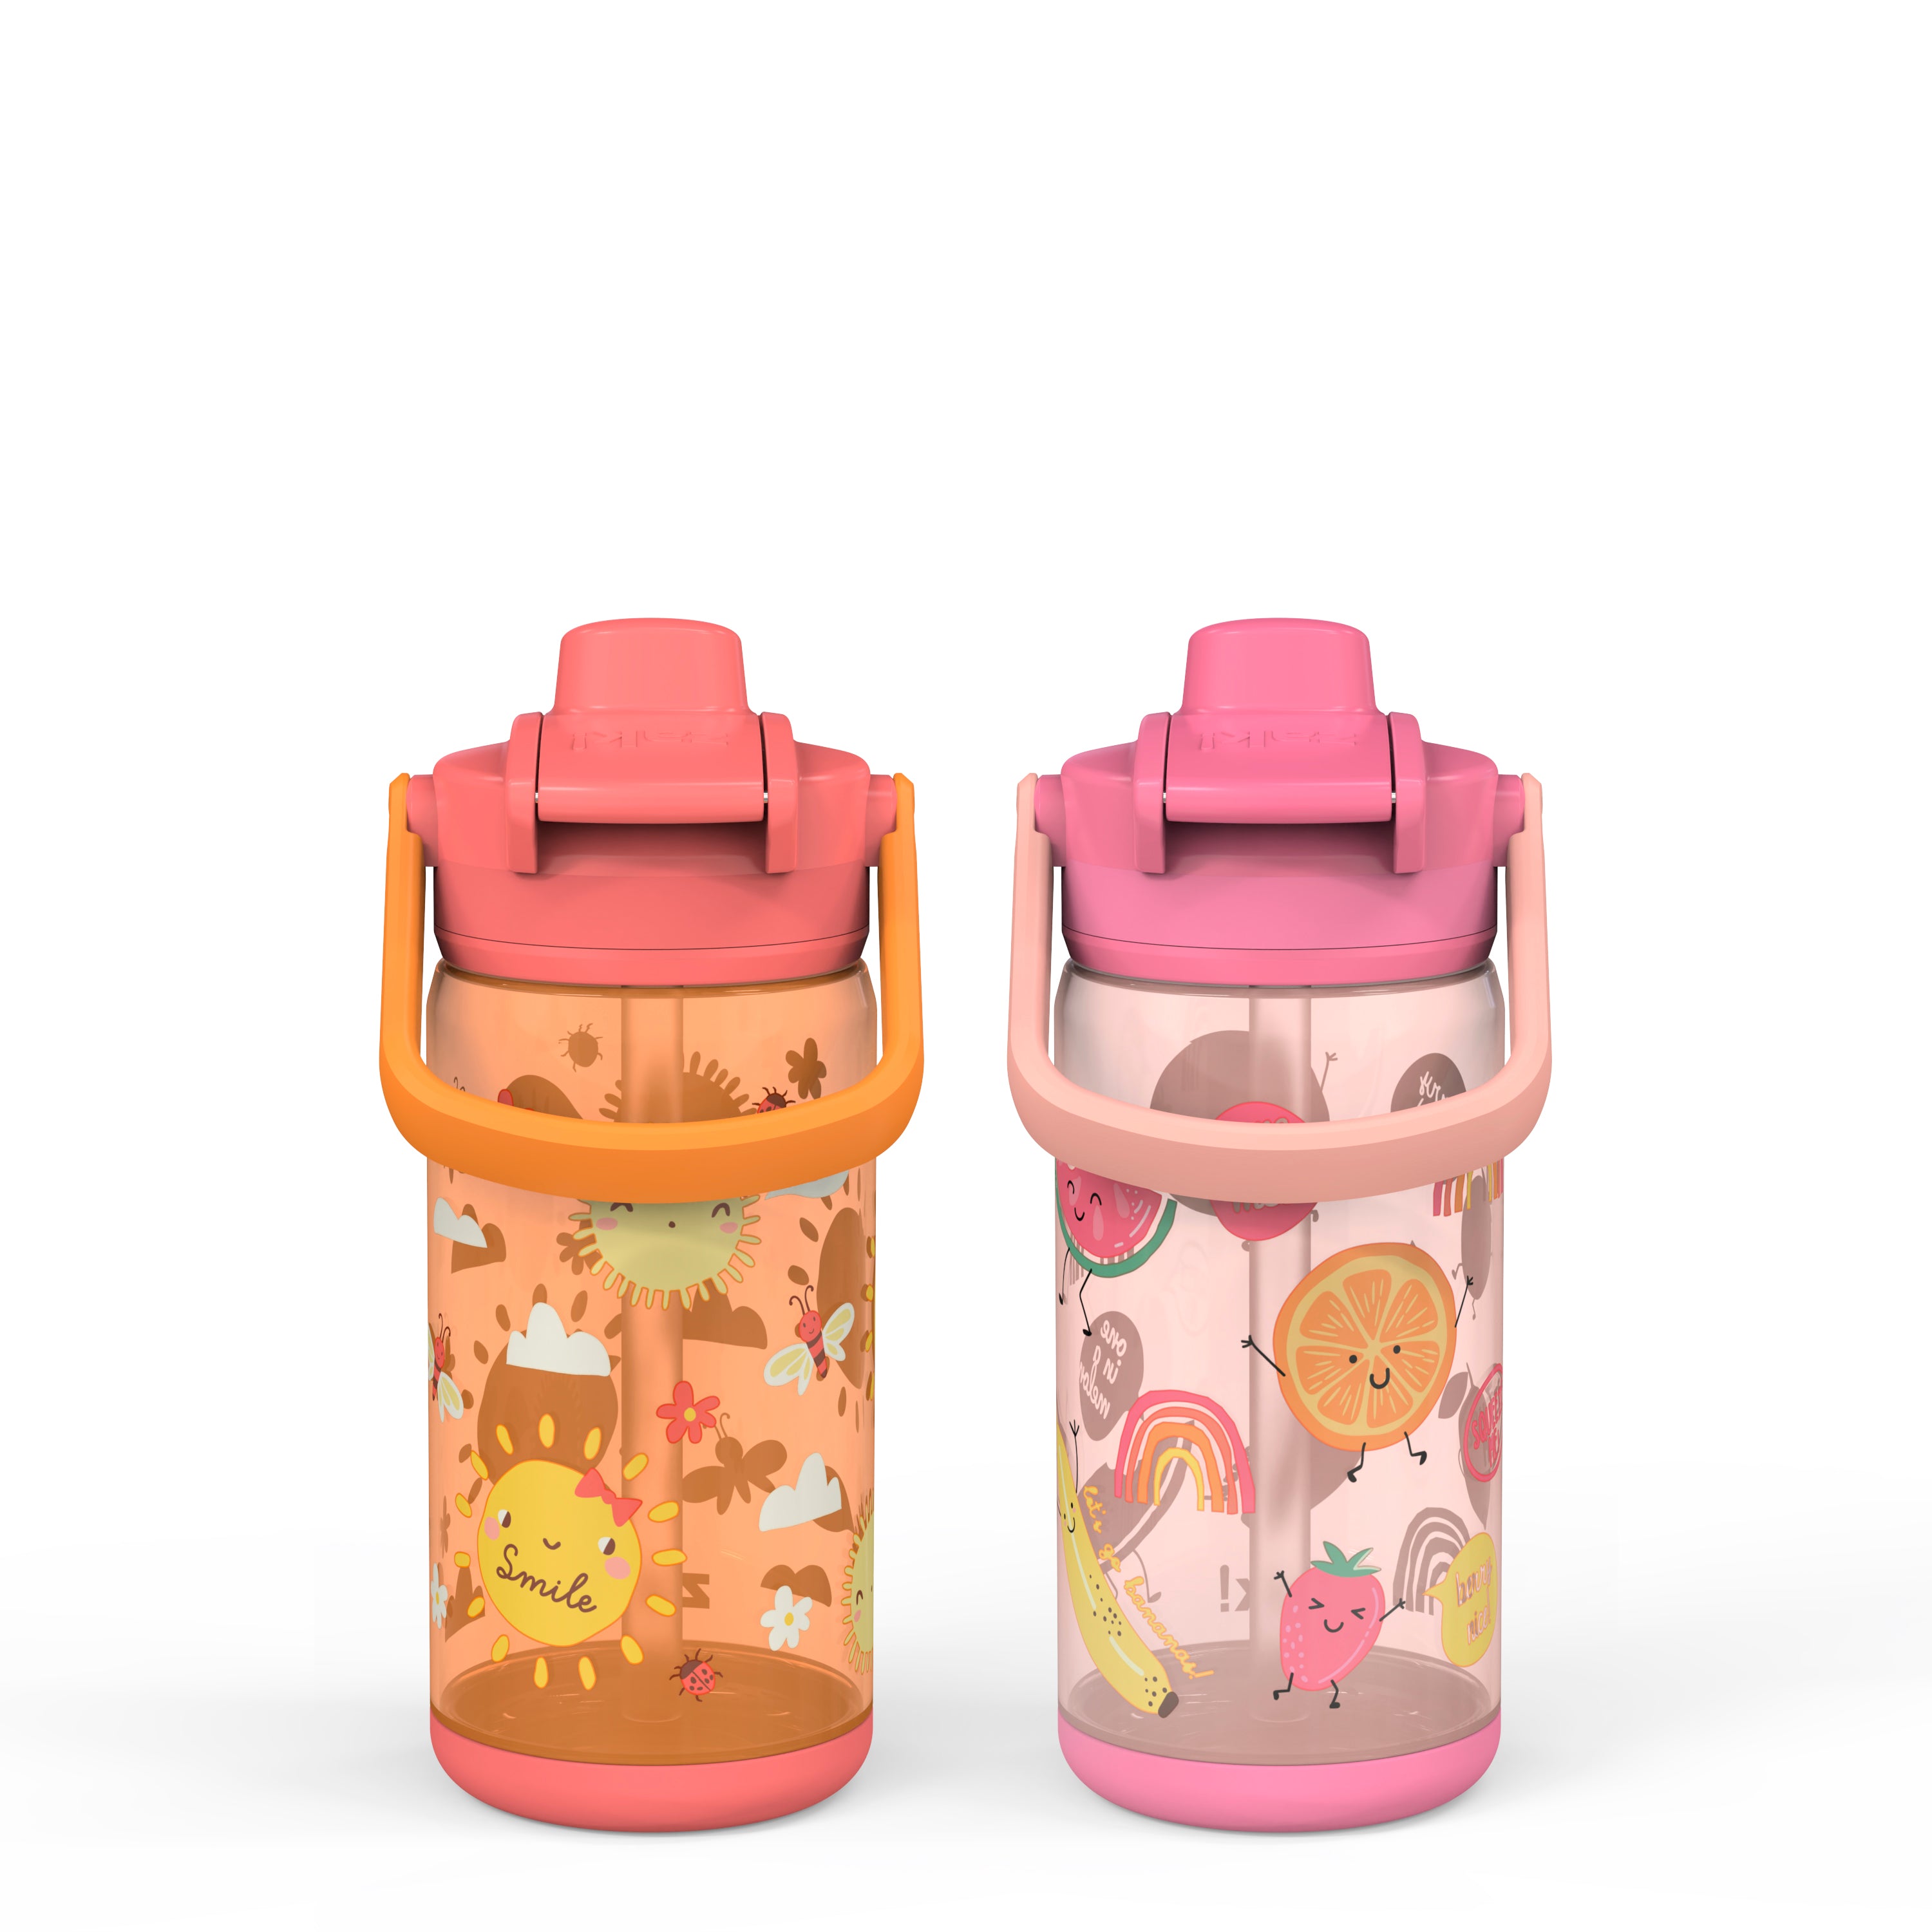 Beacon 2-Piece Kids Water Bottle Set with Covered Spout - Happy Skies and Happy Fruit, 16 Ounces